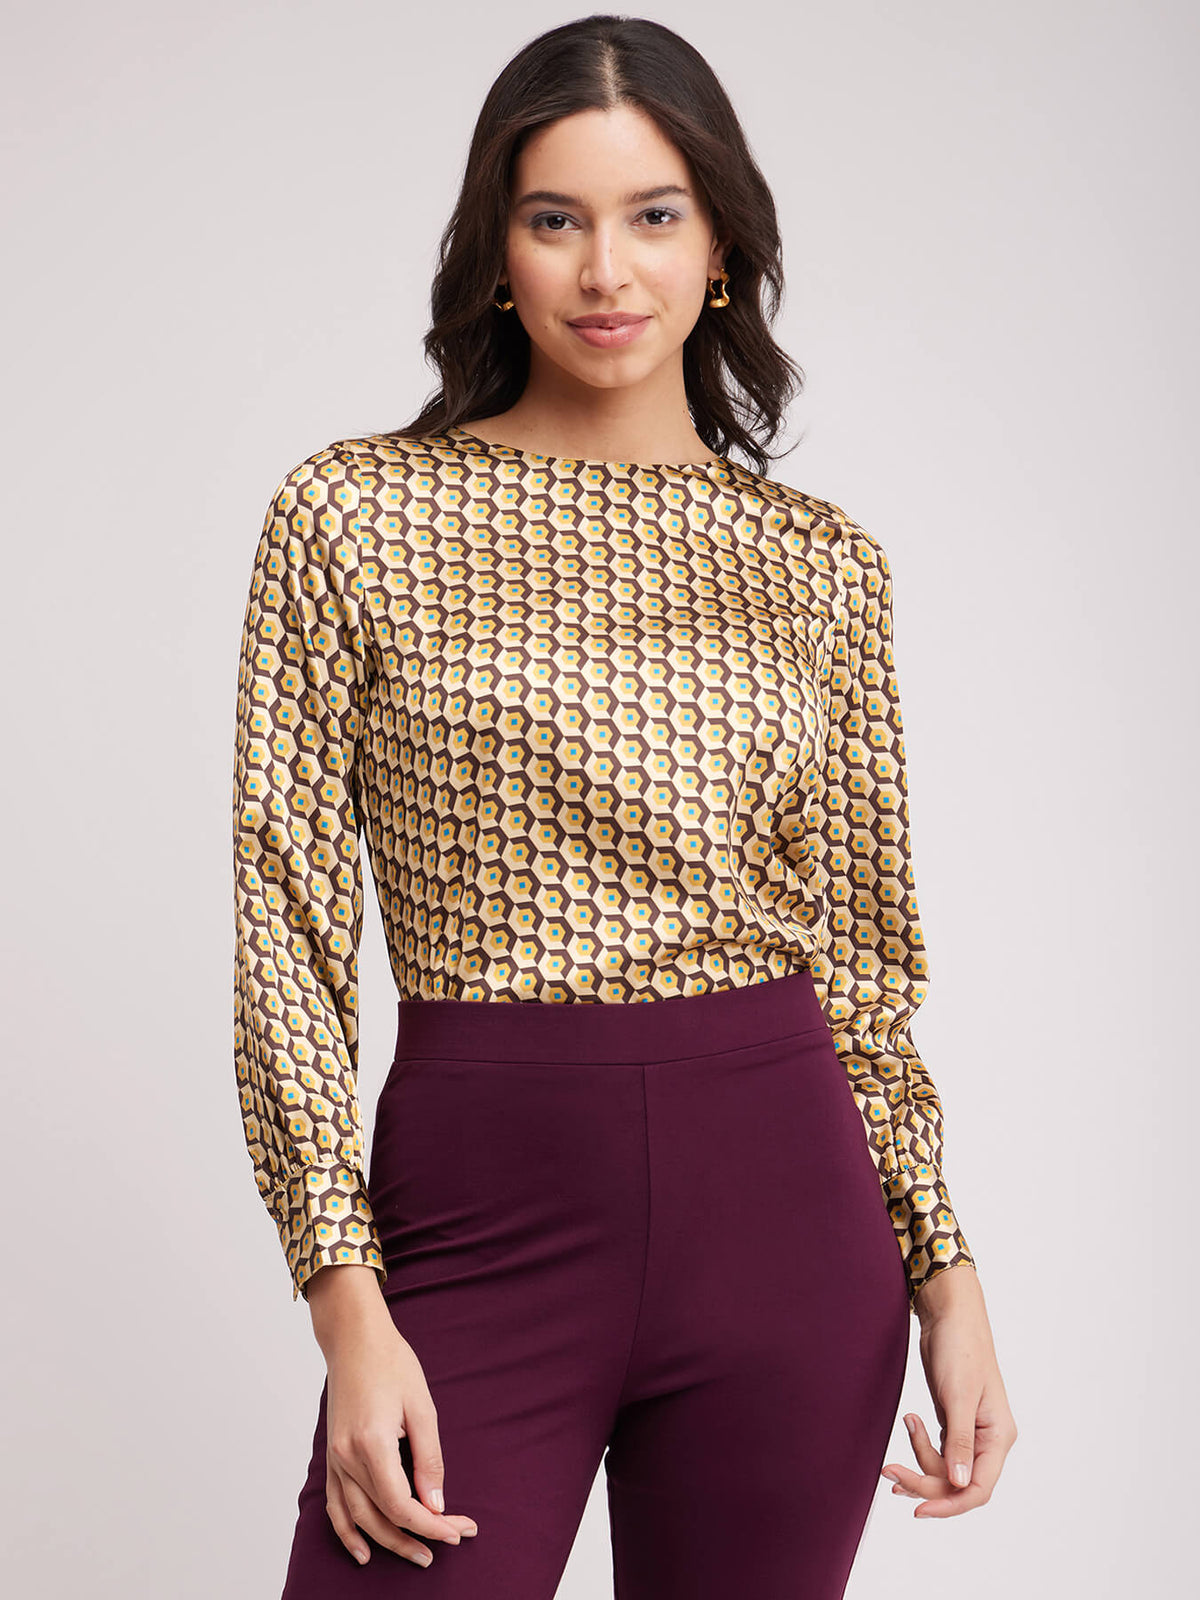 Geometric Round Neck Top - Brown And Beige